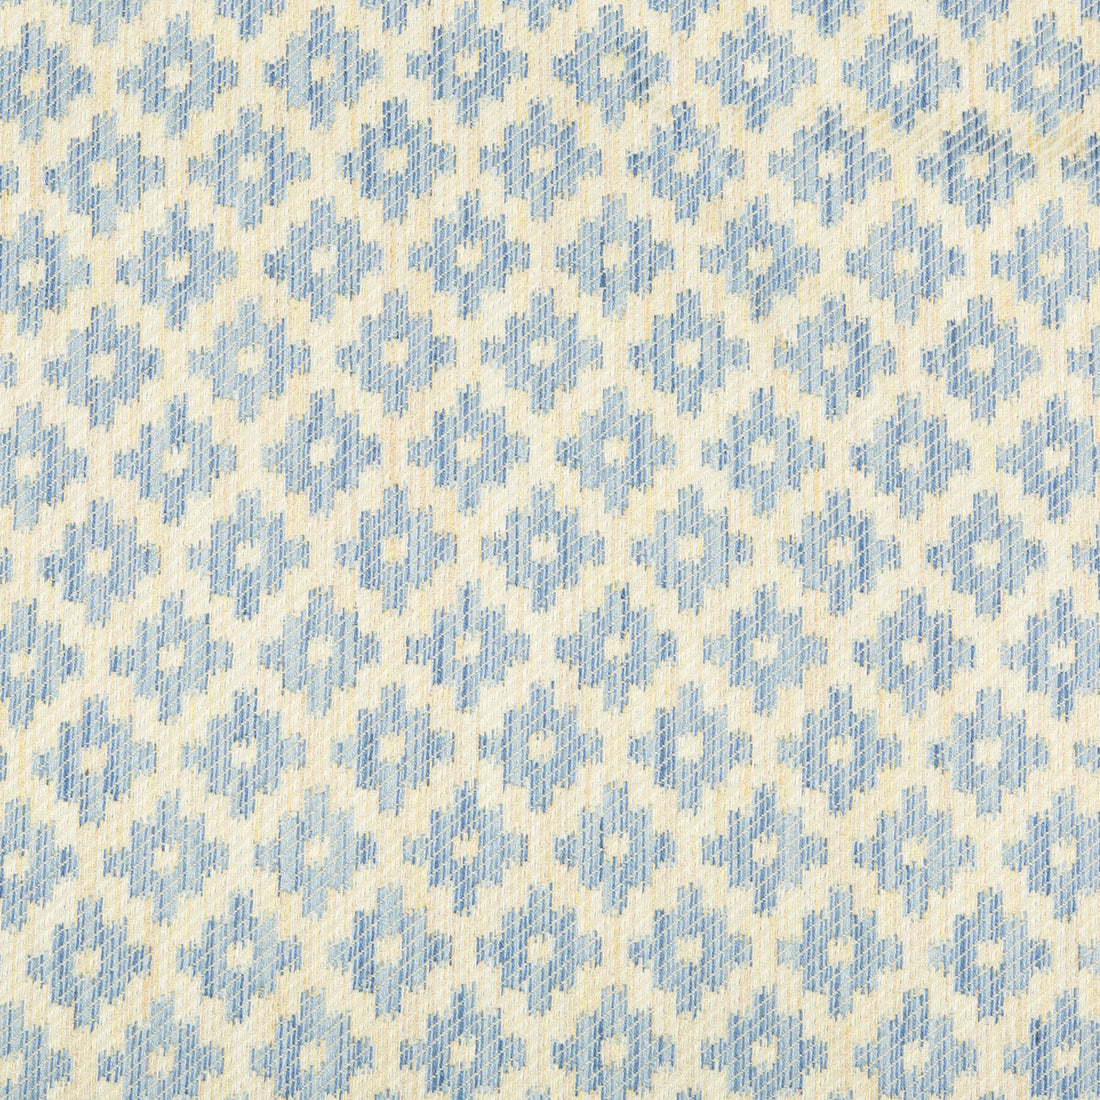 Baronet Strie fabric in canton color - pattern 8017142.5.0 - by Brunschwig &amp; Fils in the Baronet collection